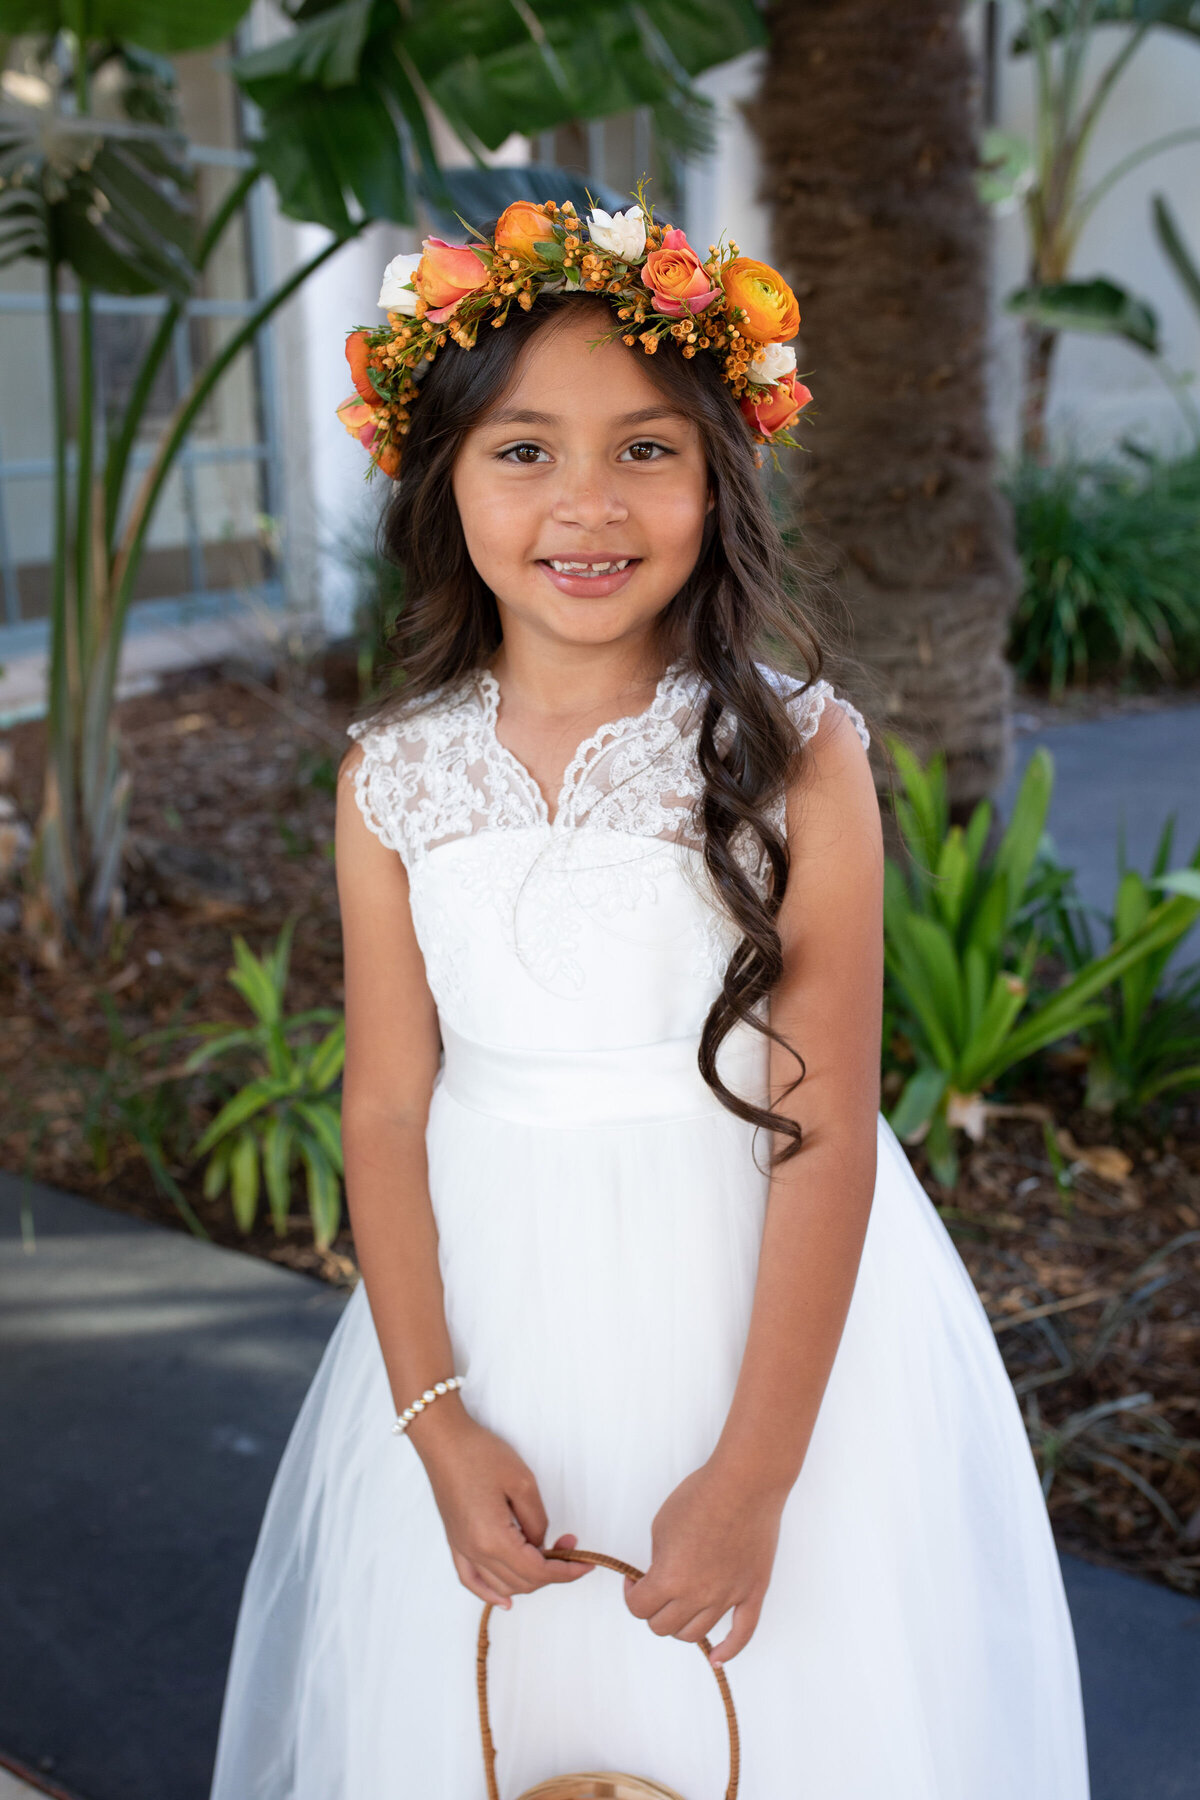 Flower crowns designed and created by Primrose & Petals.